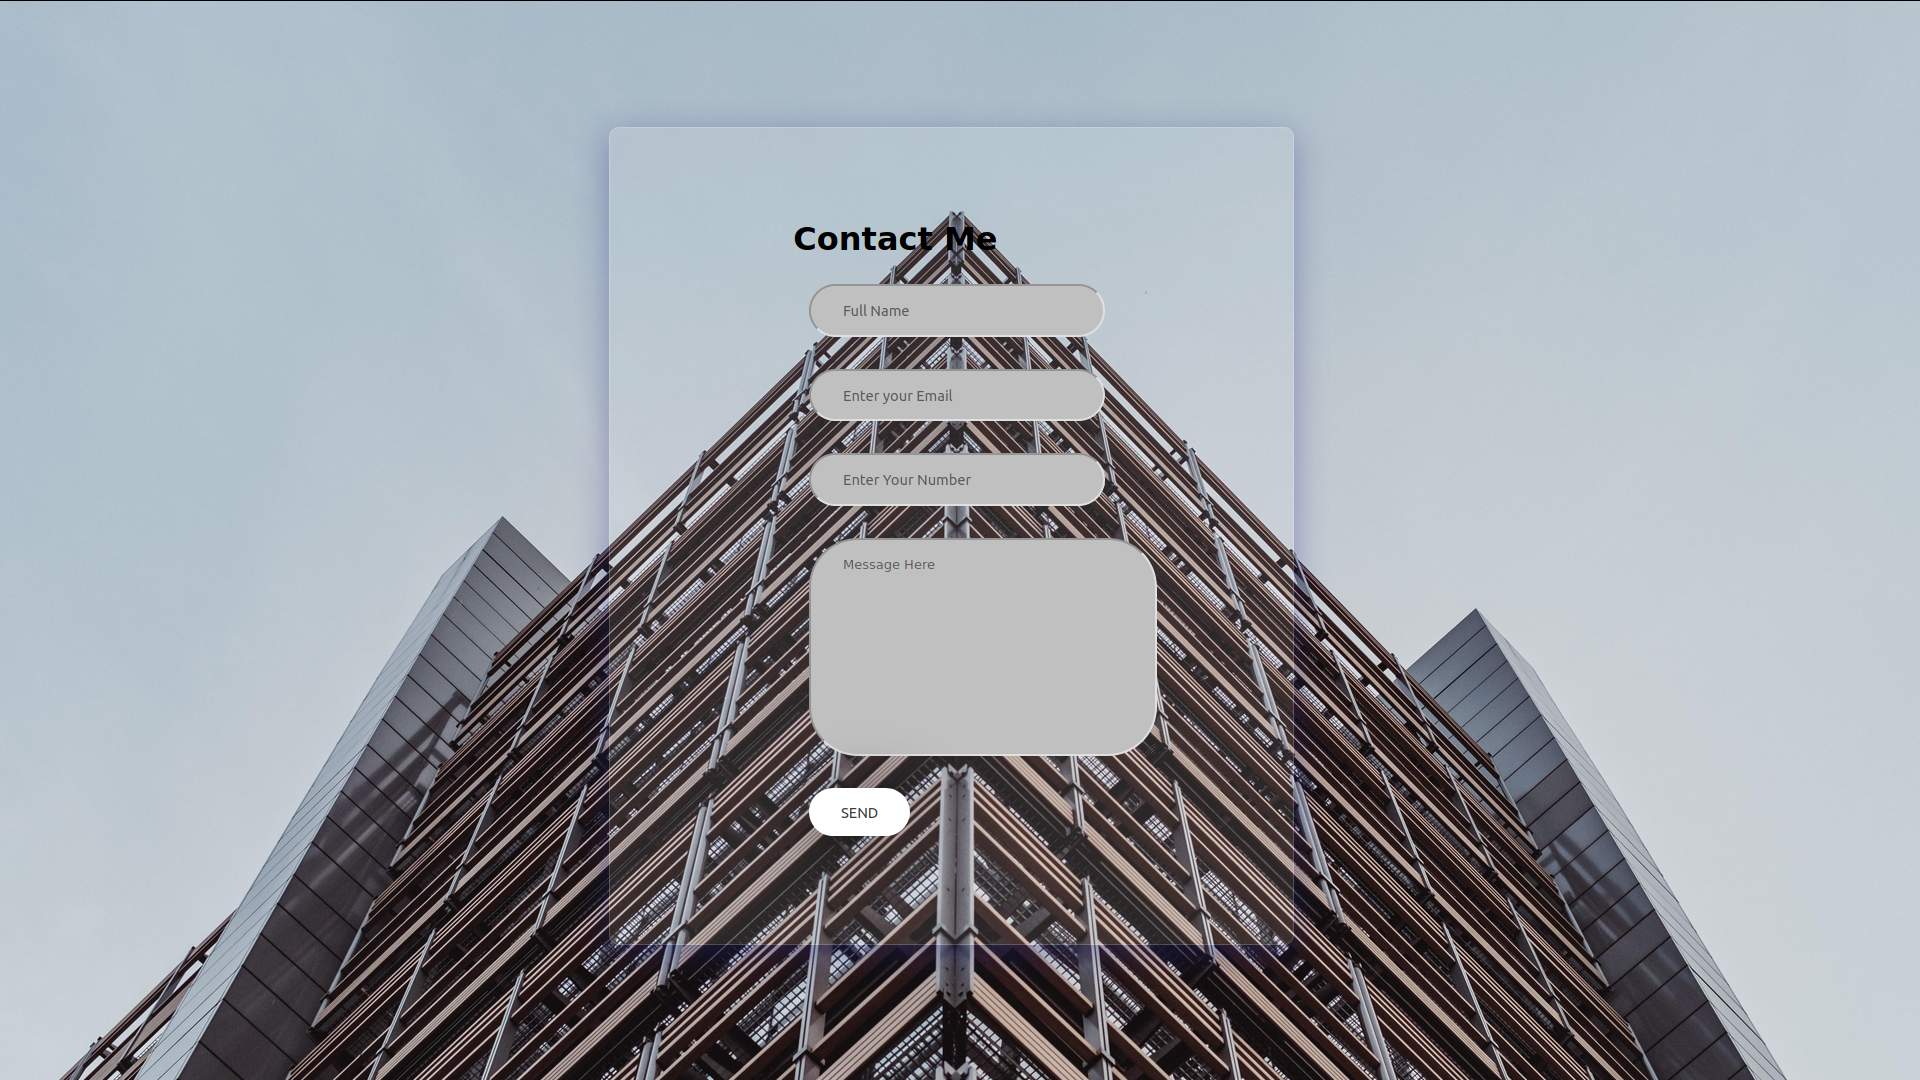 Image of Contact Page